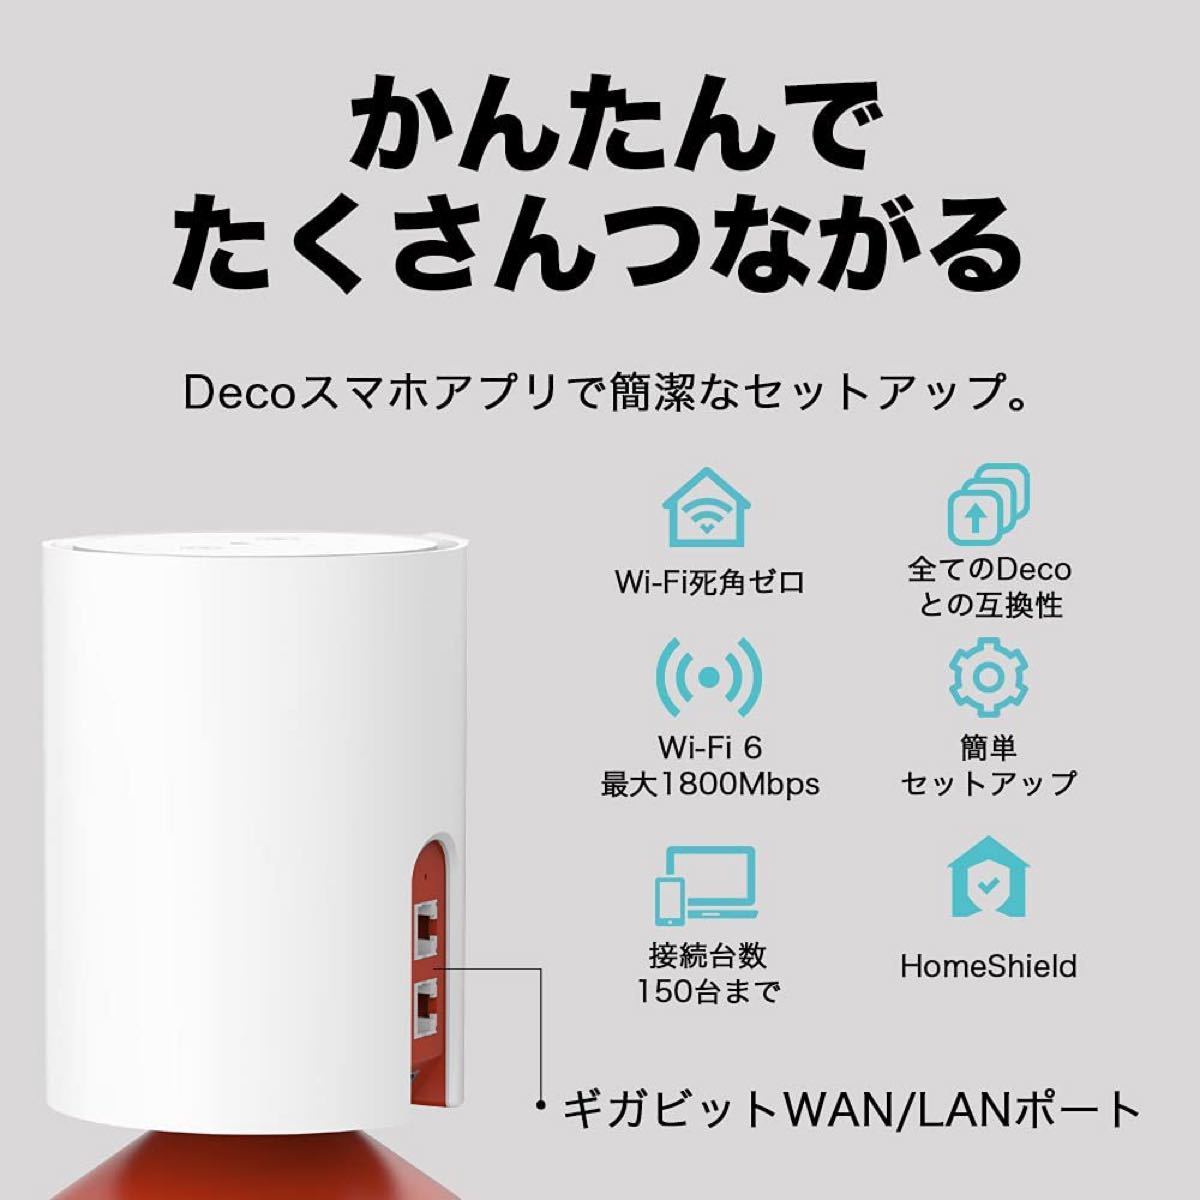 TP-Link ルーター Wi-Fi6 メッシュ Deco Voice X20